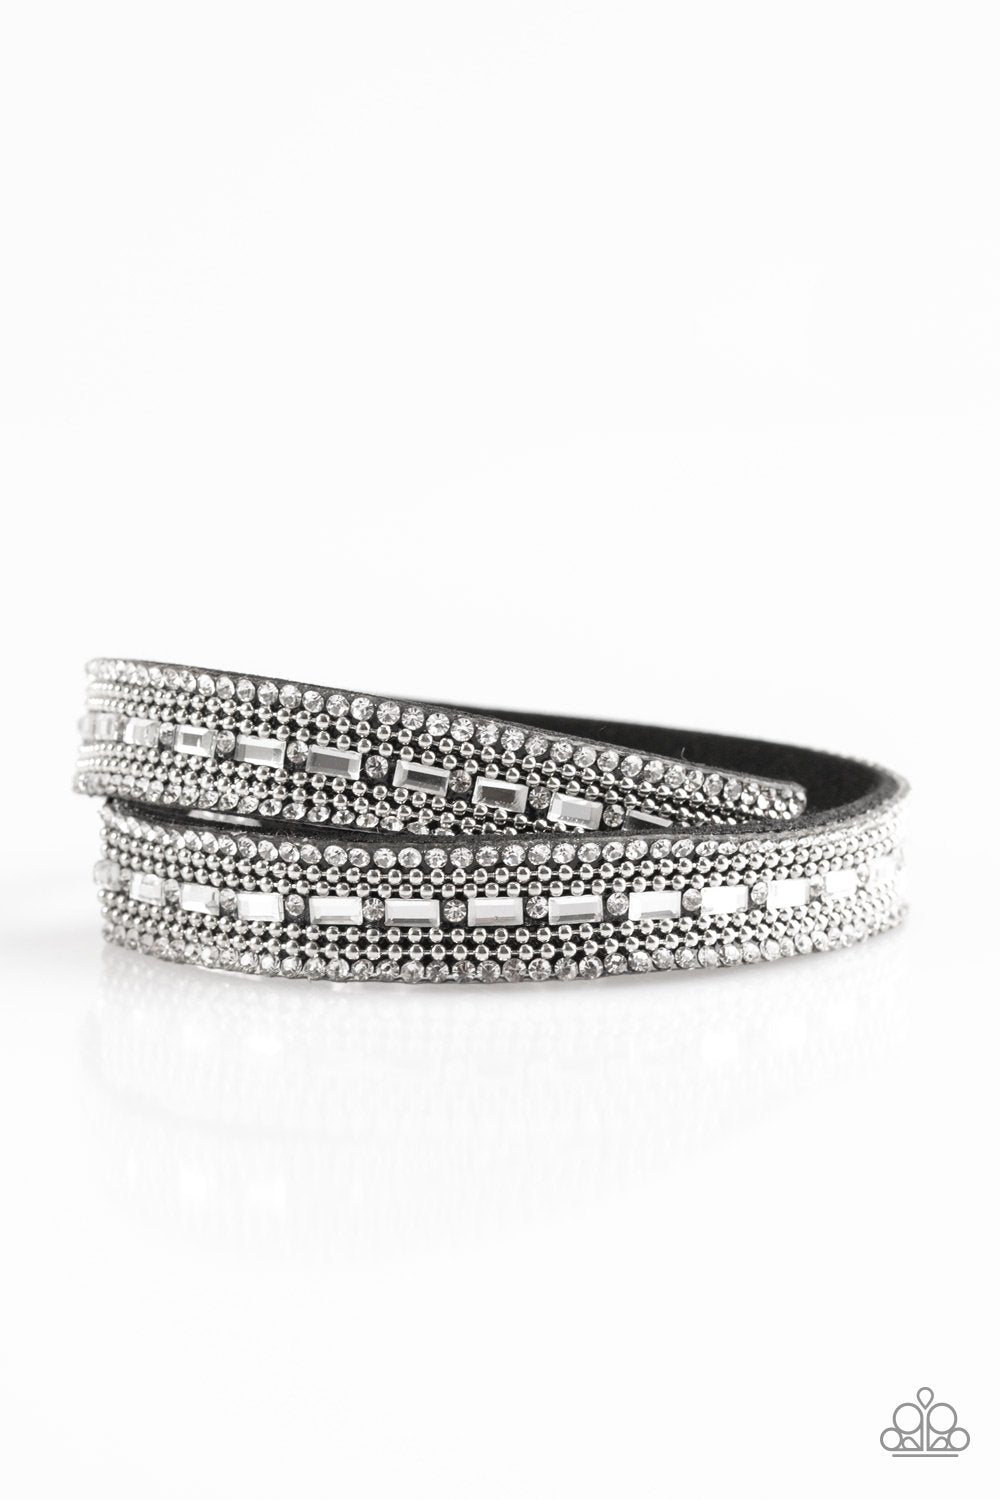 &lt;p&gt;Shimmer and Sass Black - Paparazzi Rhinestone Snap Bracelet. Featuring round and emerald style cuts, glassy white rhinestones are encrusted along a black suede band. Rows of shimmery silver ball-chain are pressed into the glittery band for a sassy finish. The elongated band allows for a trendy double wrap design. Features an adjustable snap closure.&lt;/p&gt;